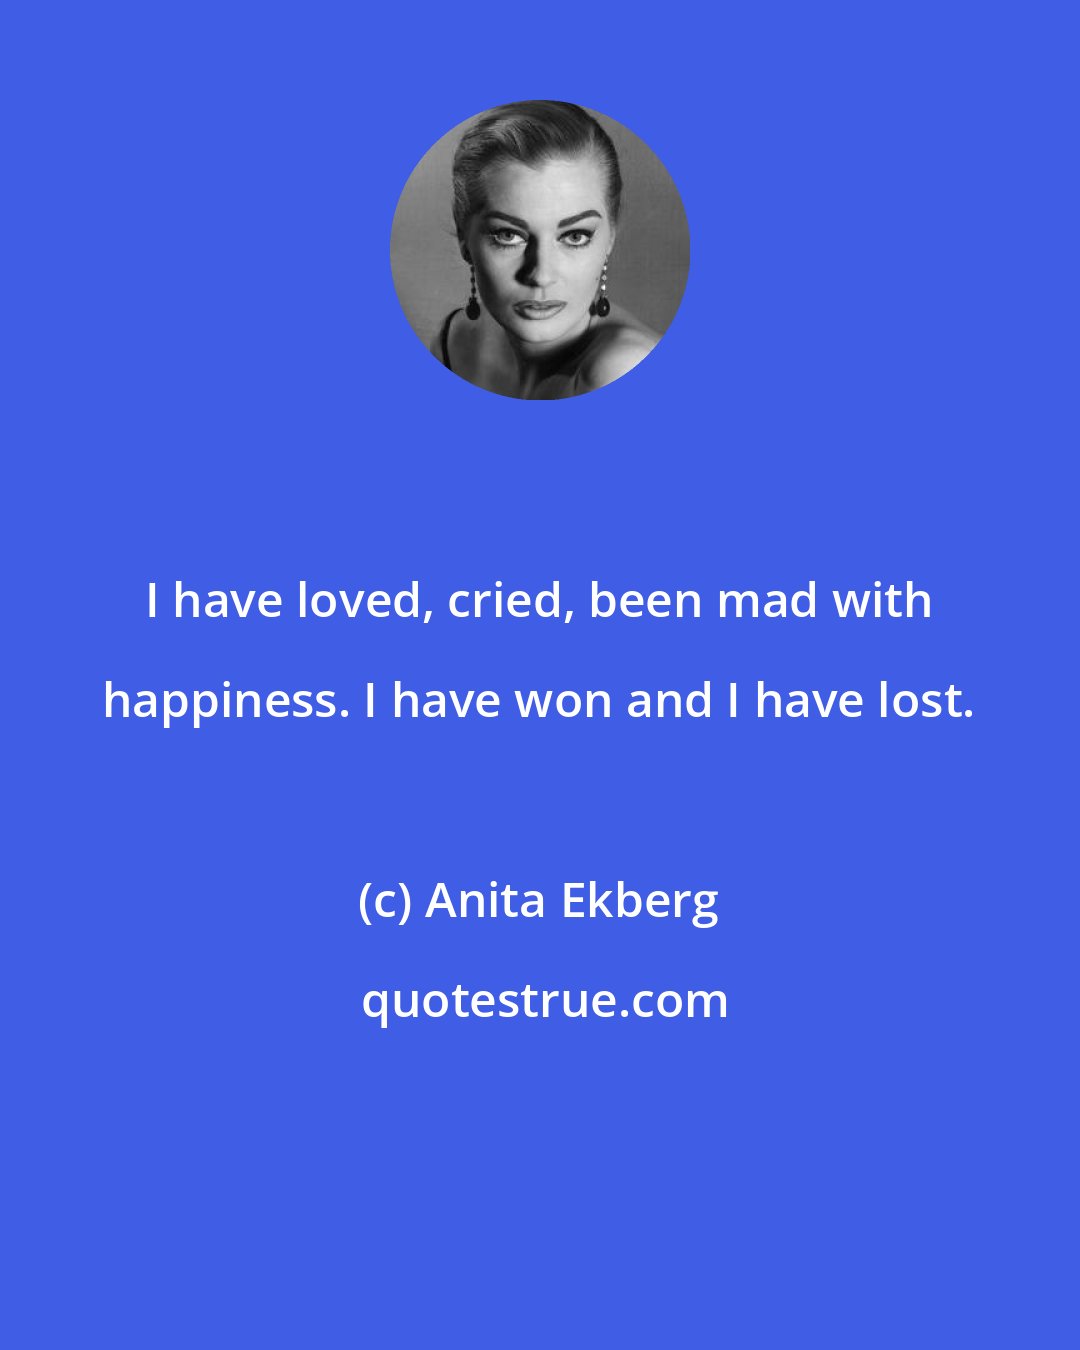 Anita Ekberg: I have loved, cried, been mad with happiness. I have won and I have lost.